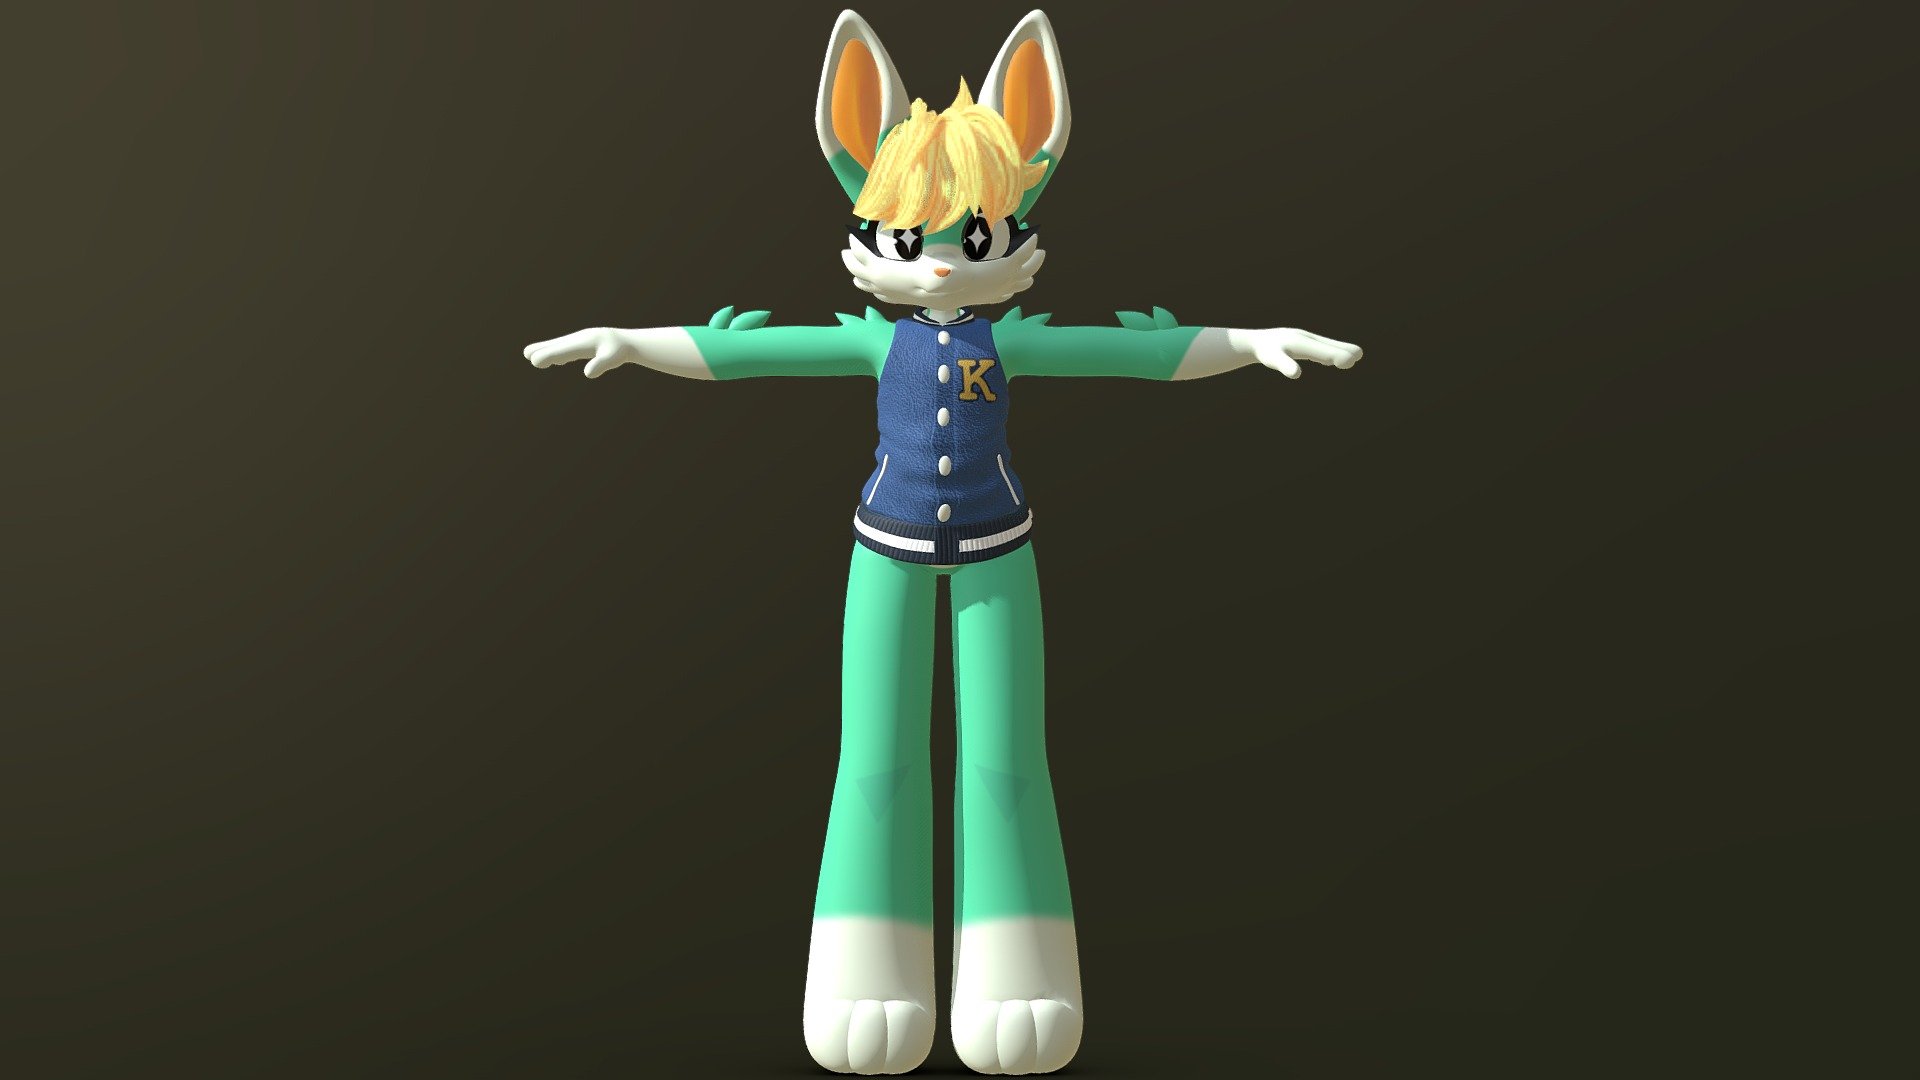 I thanks KilluKaela for allowing me to make a 3d model based on her personal design of the character Sasha (@KilluKaela Twitter). A clean model and in the T pose can be downloaded (free) from Gumroad (terraxy.gumroad) - Sasha Pose T - 3D model by Teva (@TerrAxy) 3d model